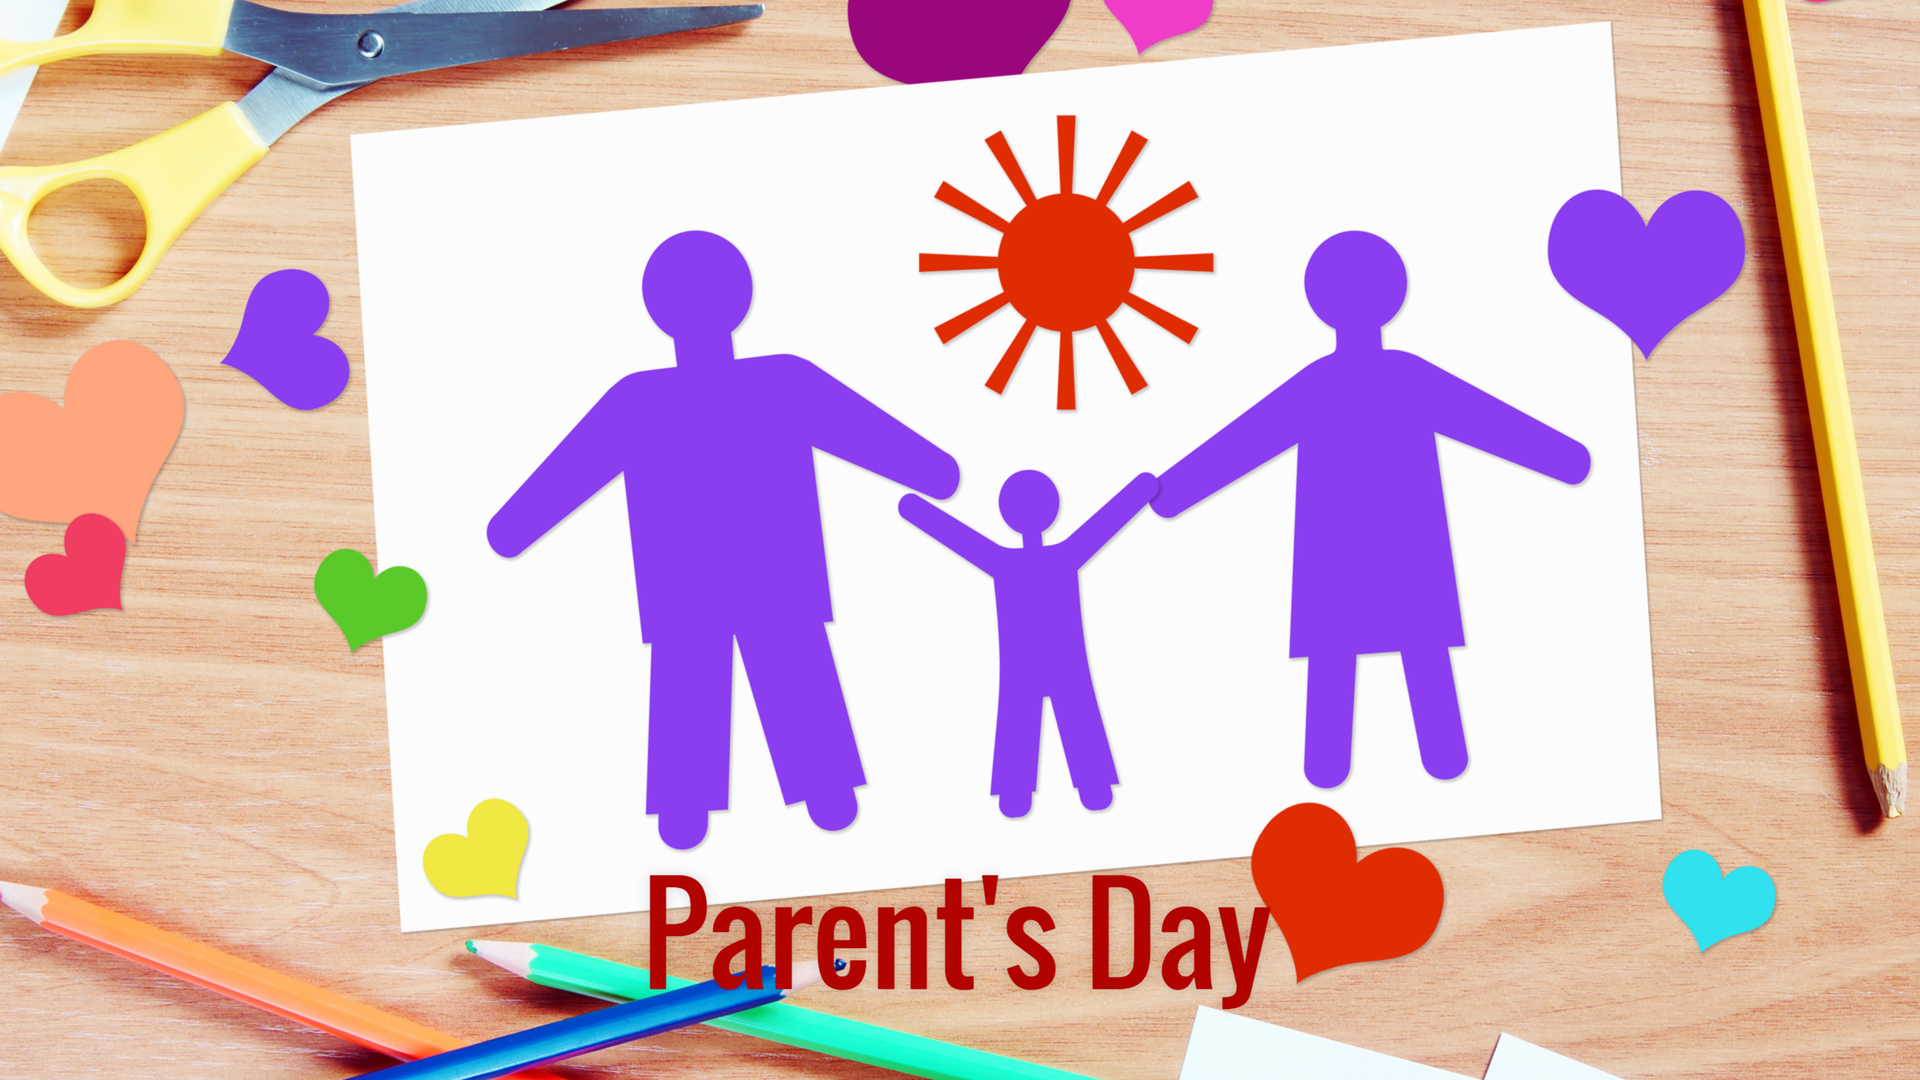 Parent’s Day in 2020/2021 When, Where, Why, How is Celebrated?